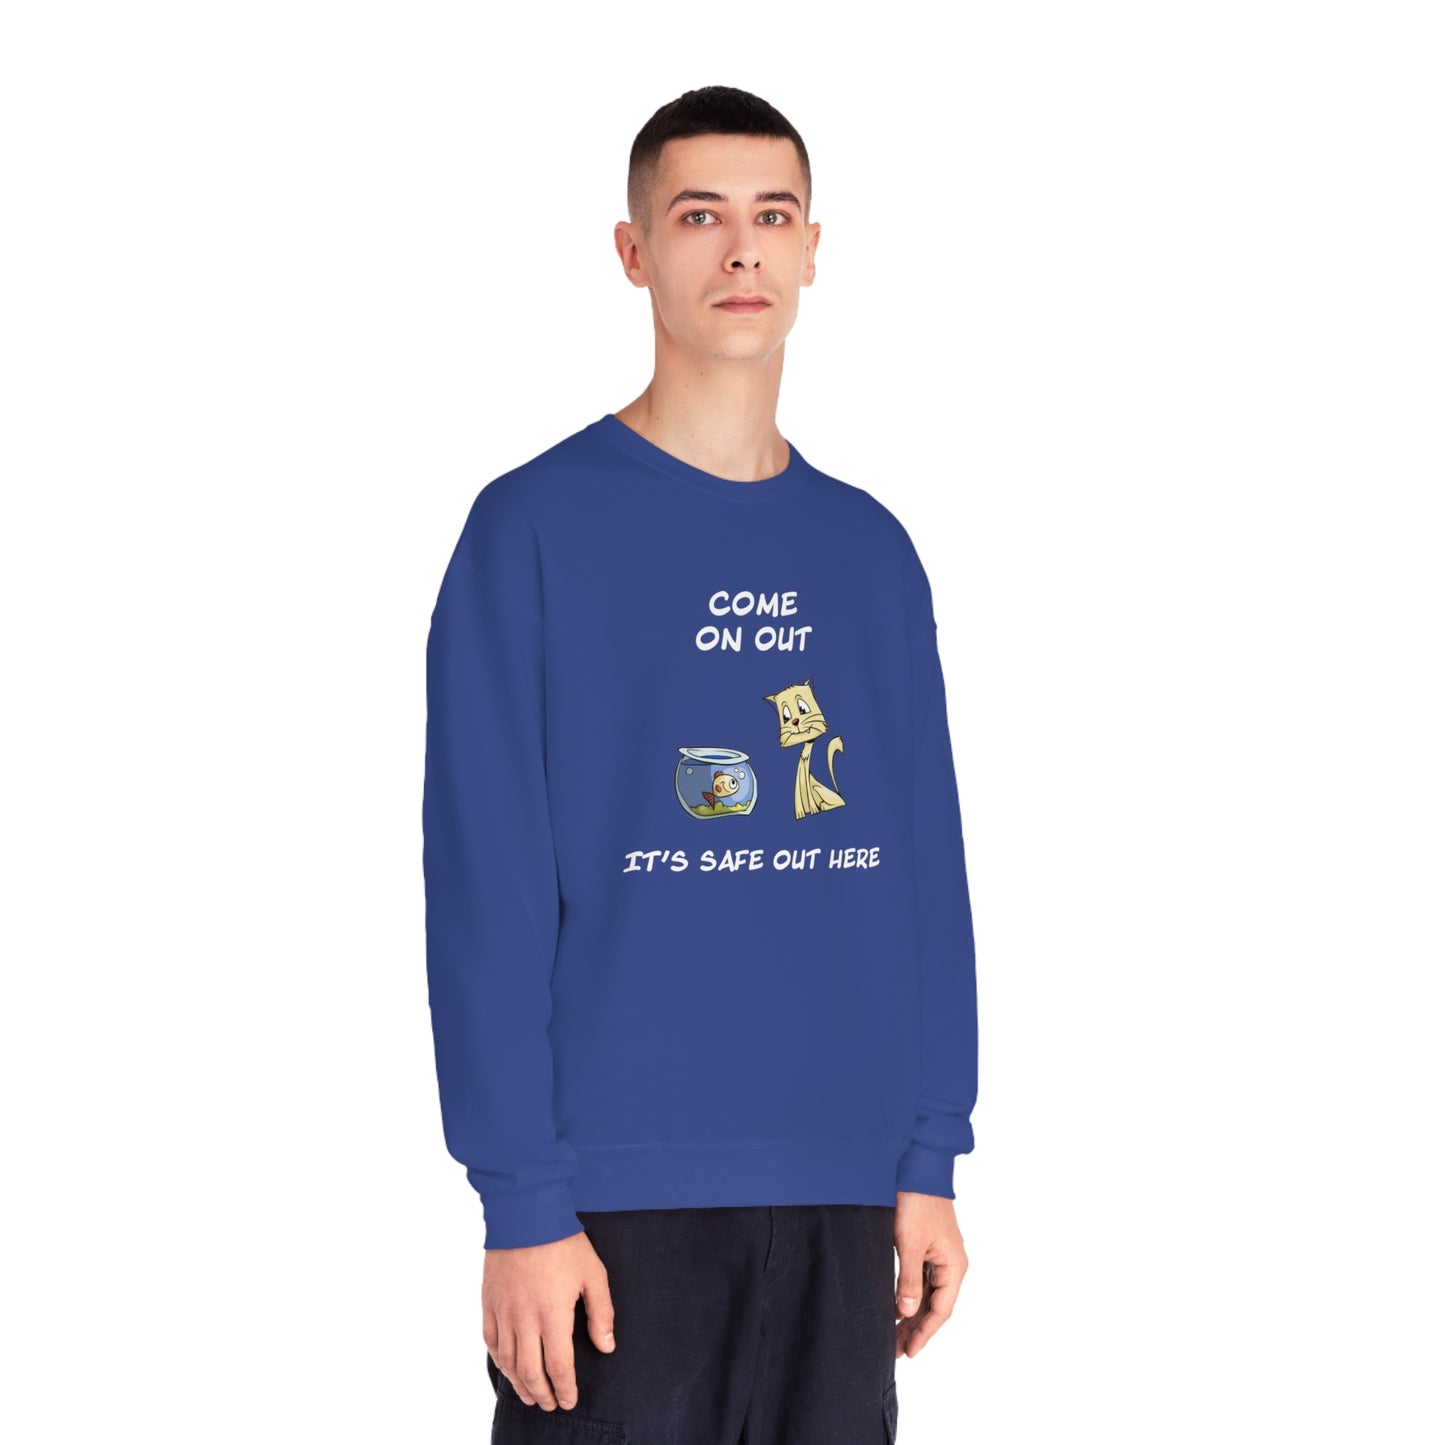 Kitty Cat Trying To Trick The Fish To Come Out. Unisex NuBlend® Crewneck Sweatshirt